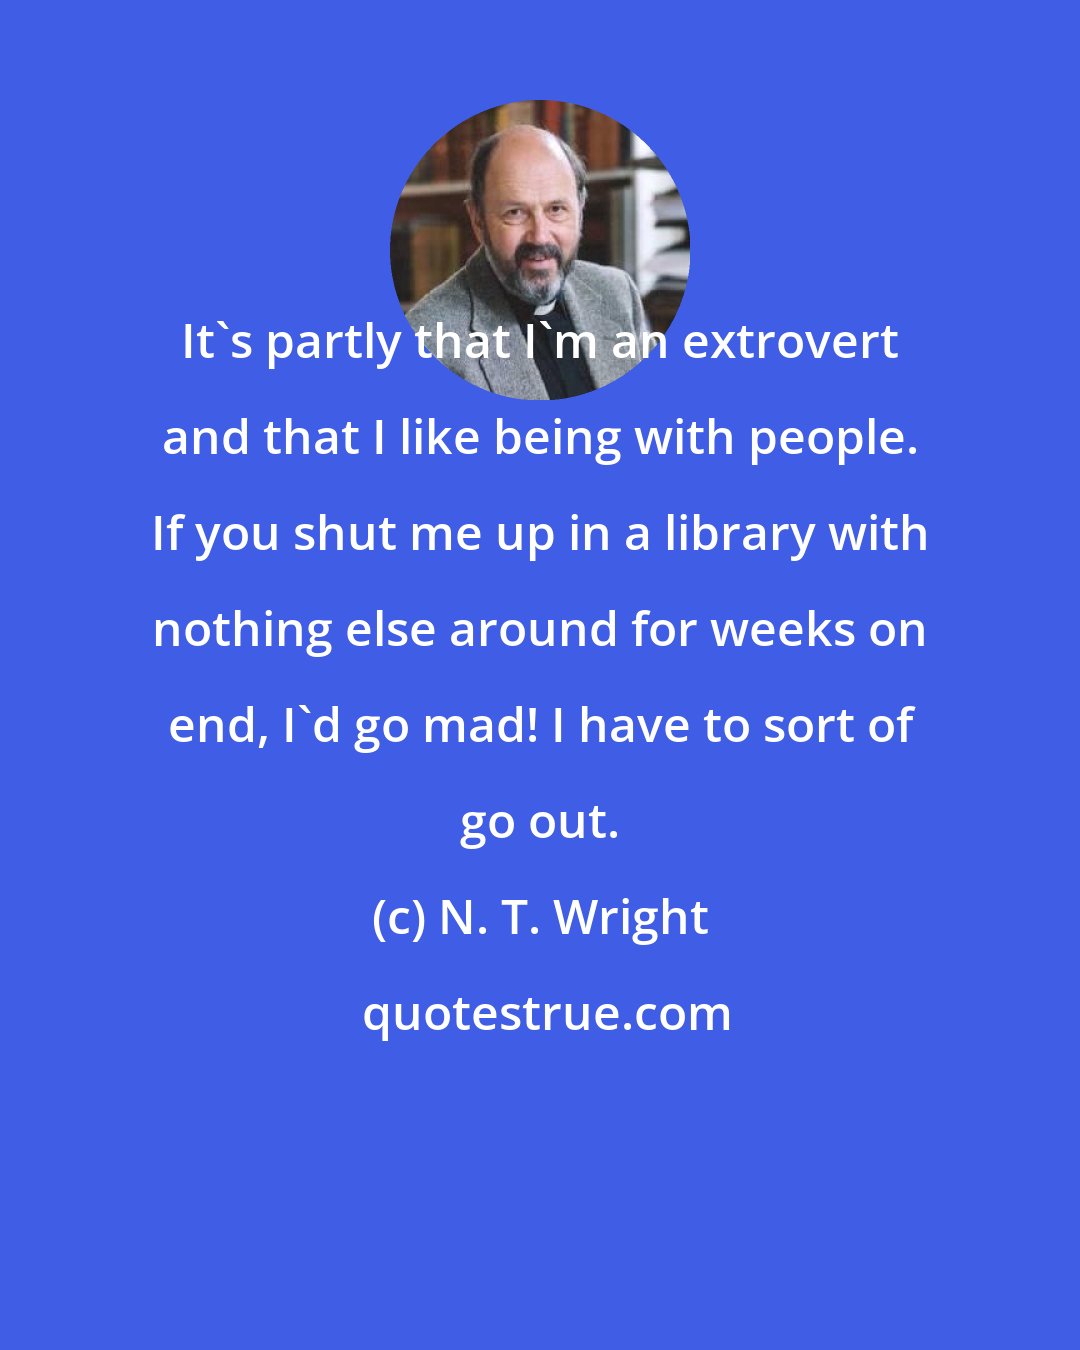 N. T. Wright: It's partly that I'm an extrovert and that I like being with people. If you shut me up in a library with nothing else around for weeks on end, I'd go mad! I have to sort of go out.